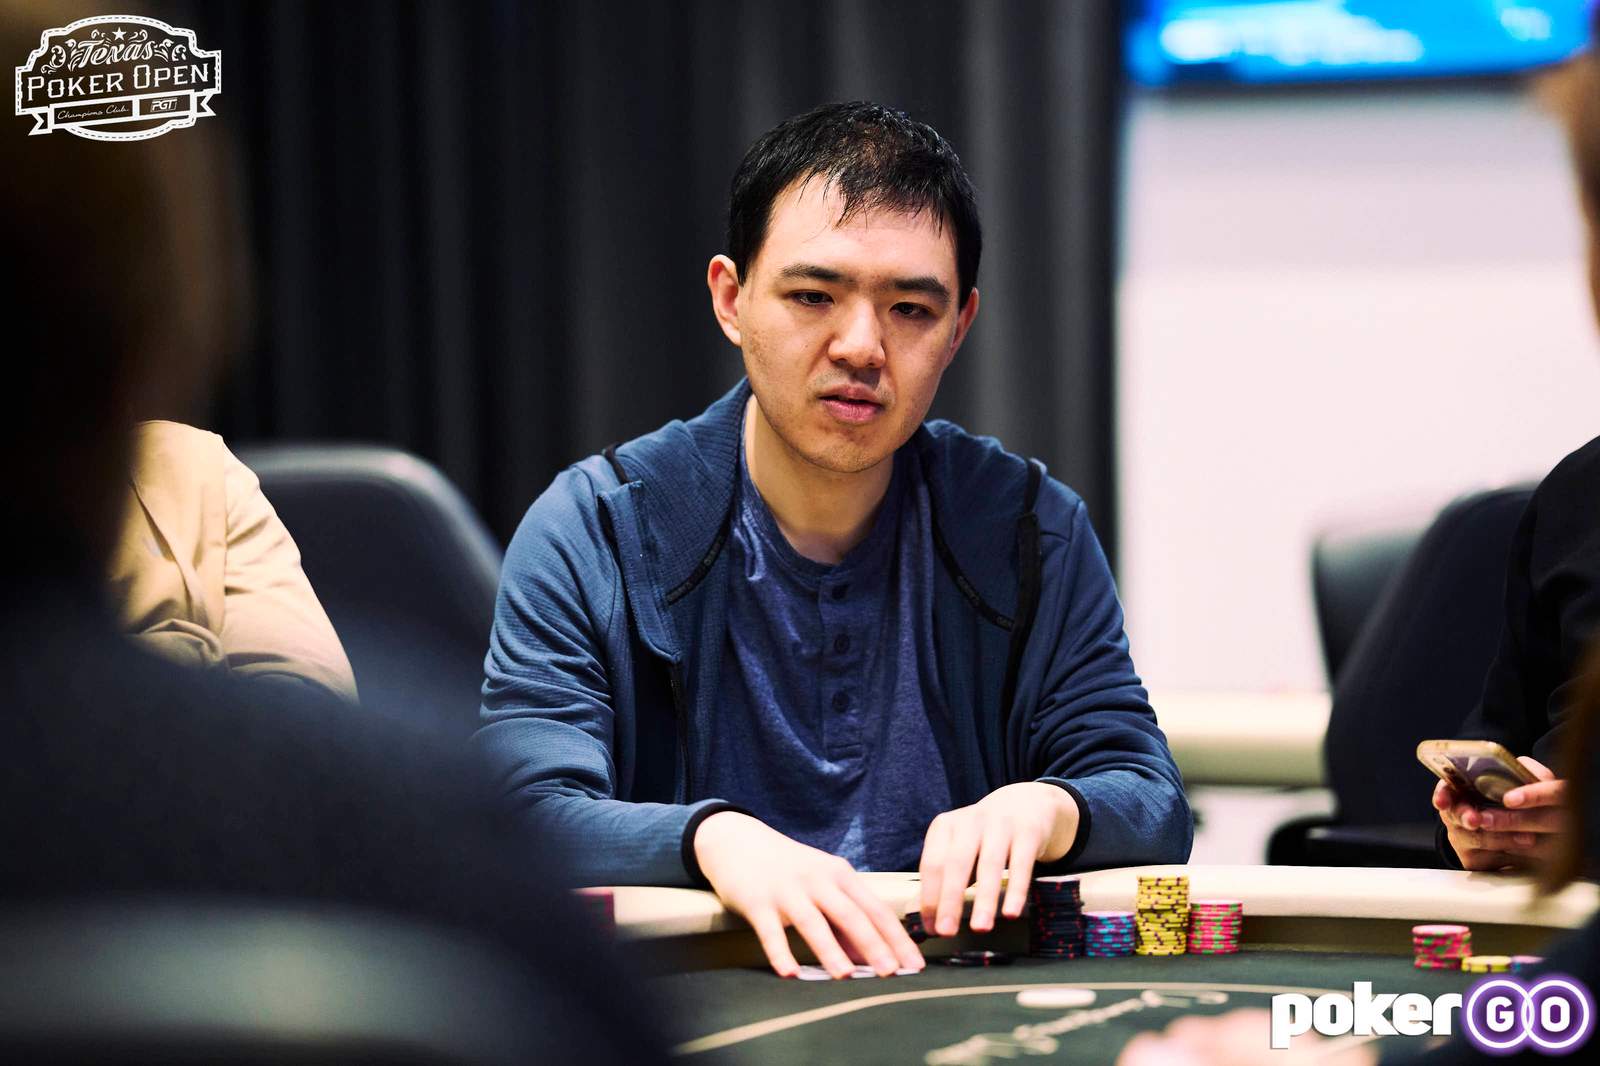 Bob Shao Leads 6 Survivors From Day 1A of Texas Poker Open $3,300 Main Event